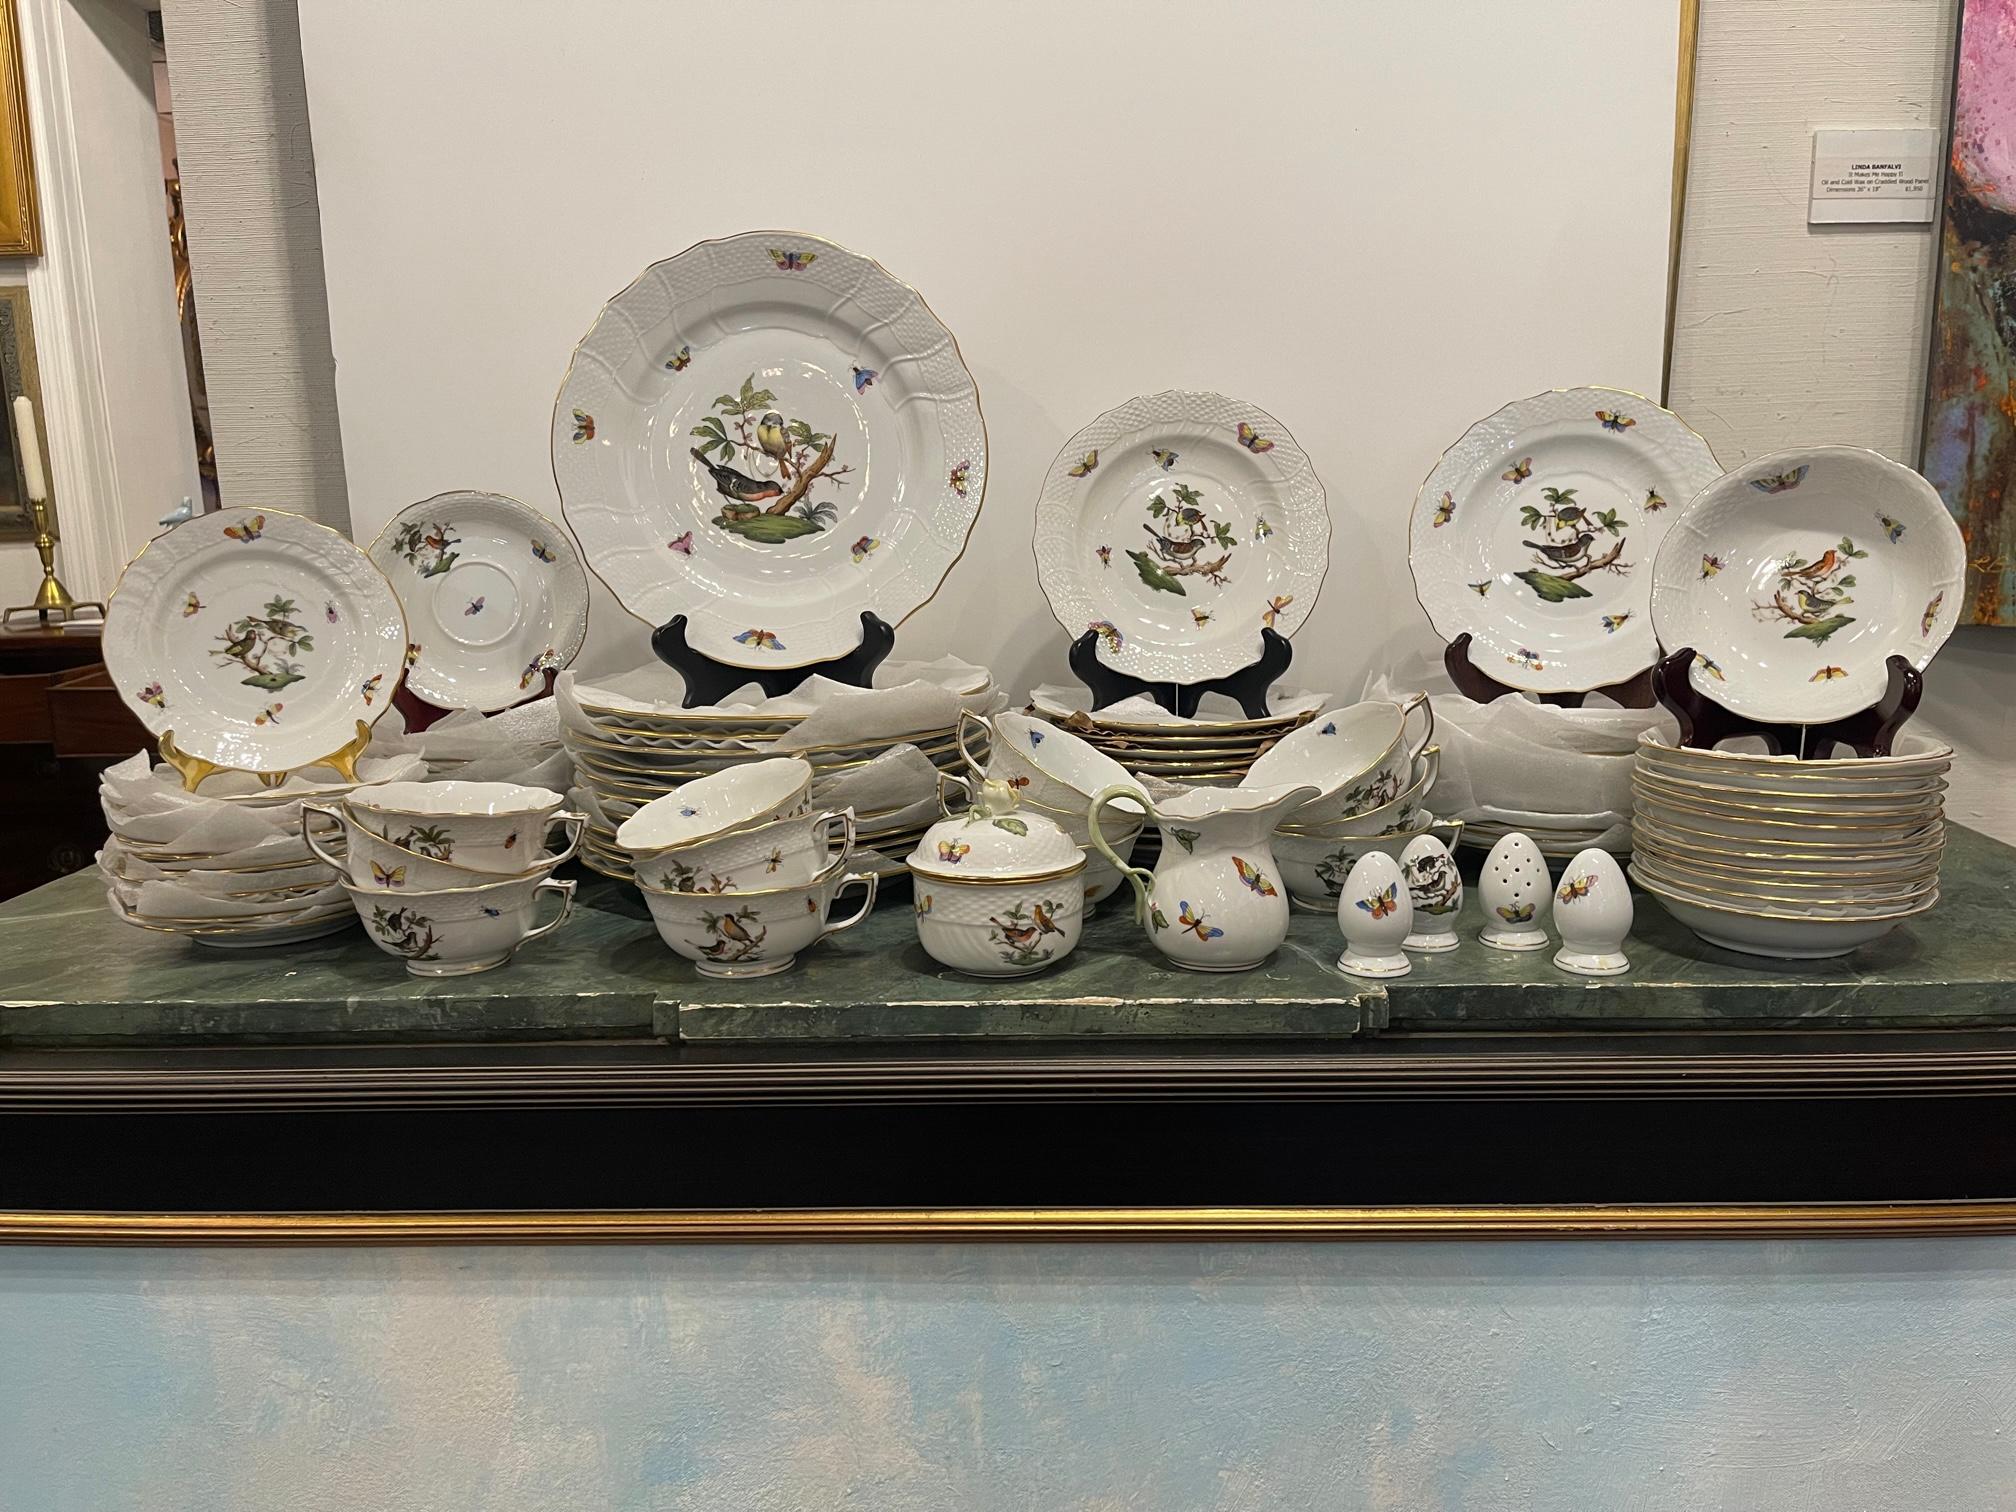 Set of Twelve 9-Piece Place Setting Herend Rothschild Bird China with 24K Gold Accents, 20th Century.

Set includes 12 dinner plates, 12 salad plates, 12 bread and butter plates, 12 dessert plates, 12 saucers, 12 cups, 12 fruit bowls, 12 individual